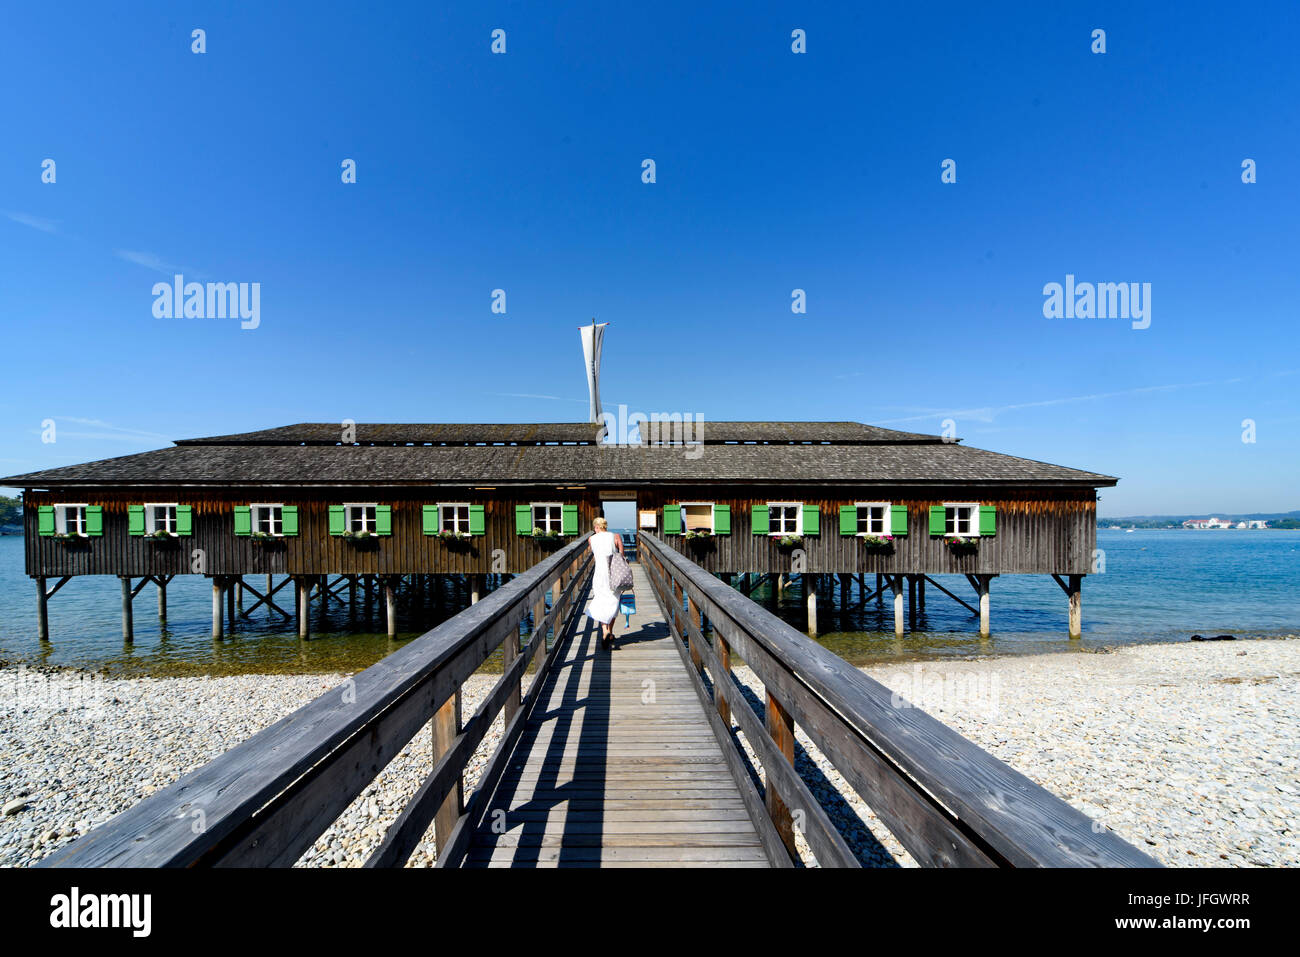 Lakeside with military-historical swimming pool, Bregenz, Lake of Constance, Vorarlberg, Austria Stock Photo